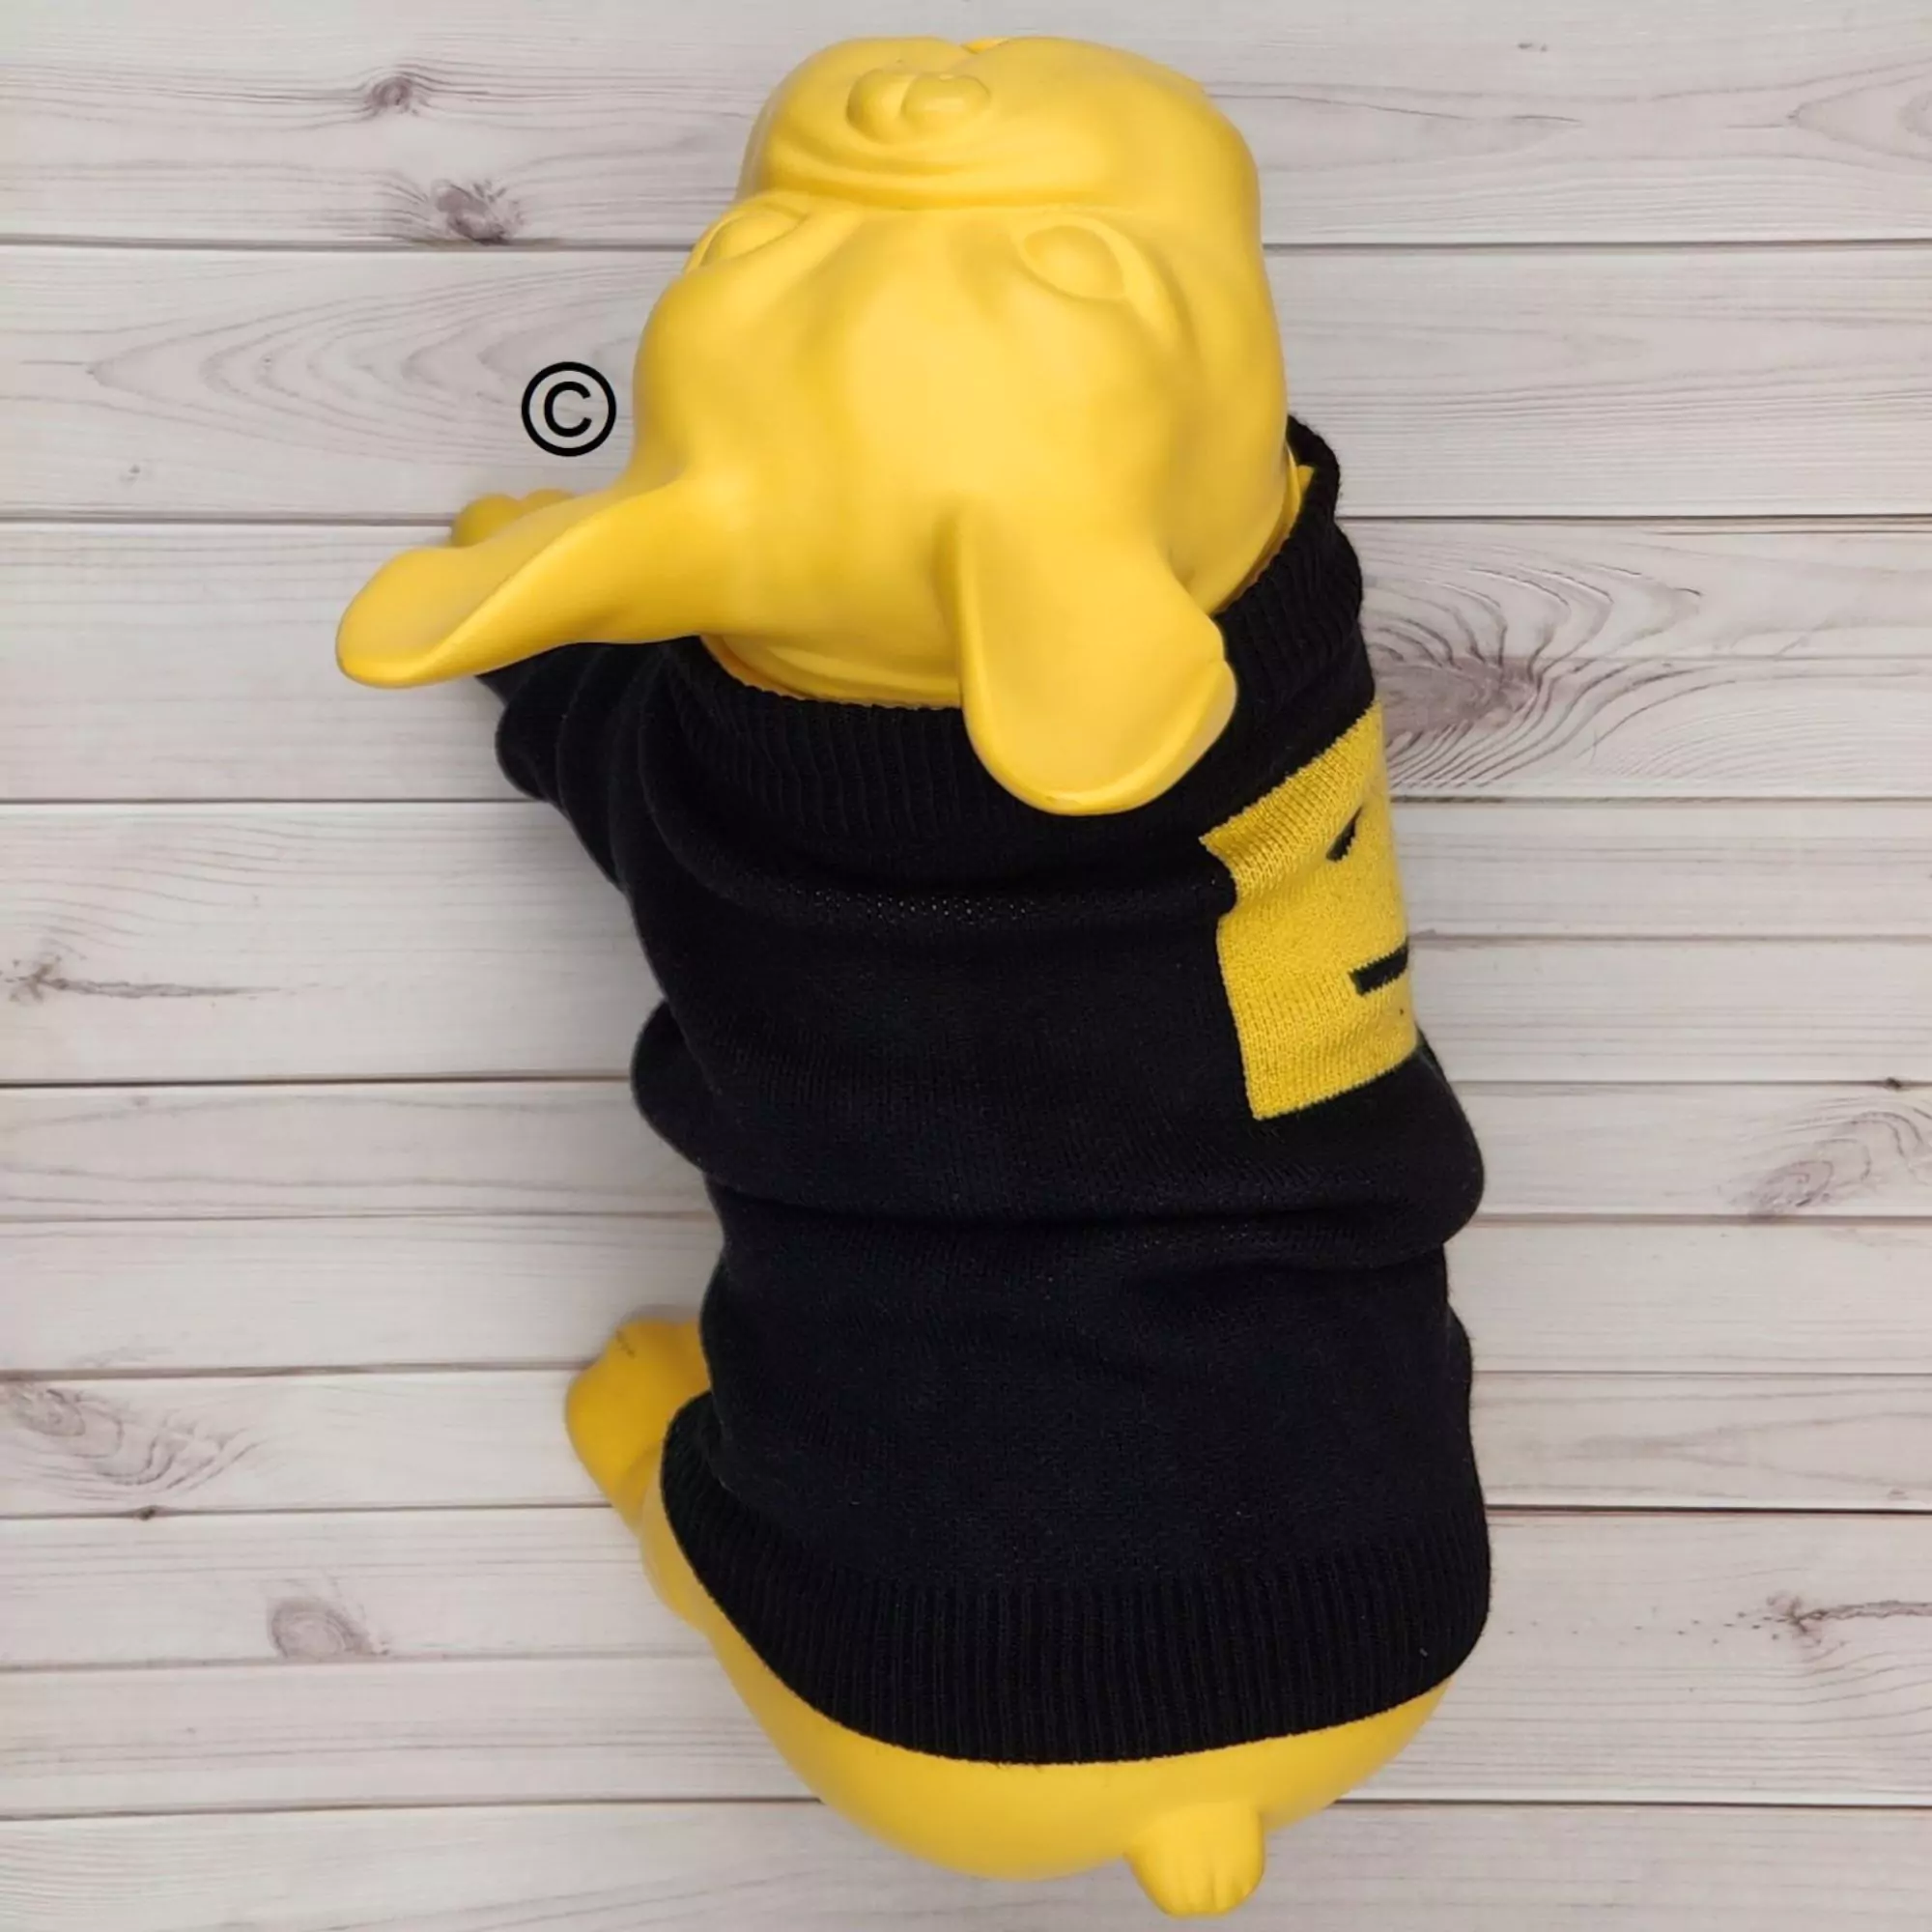 Black Knitted Dog Sweater with a Sunny Yellow Smile Face2